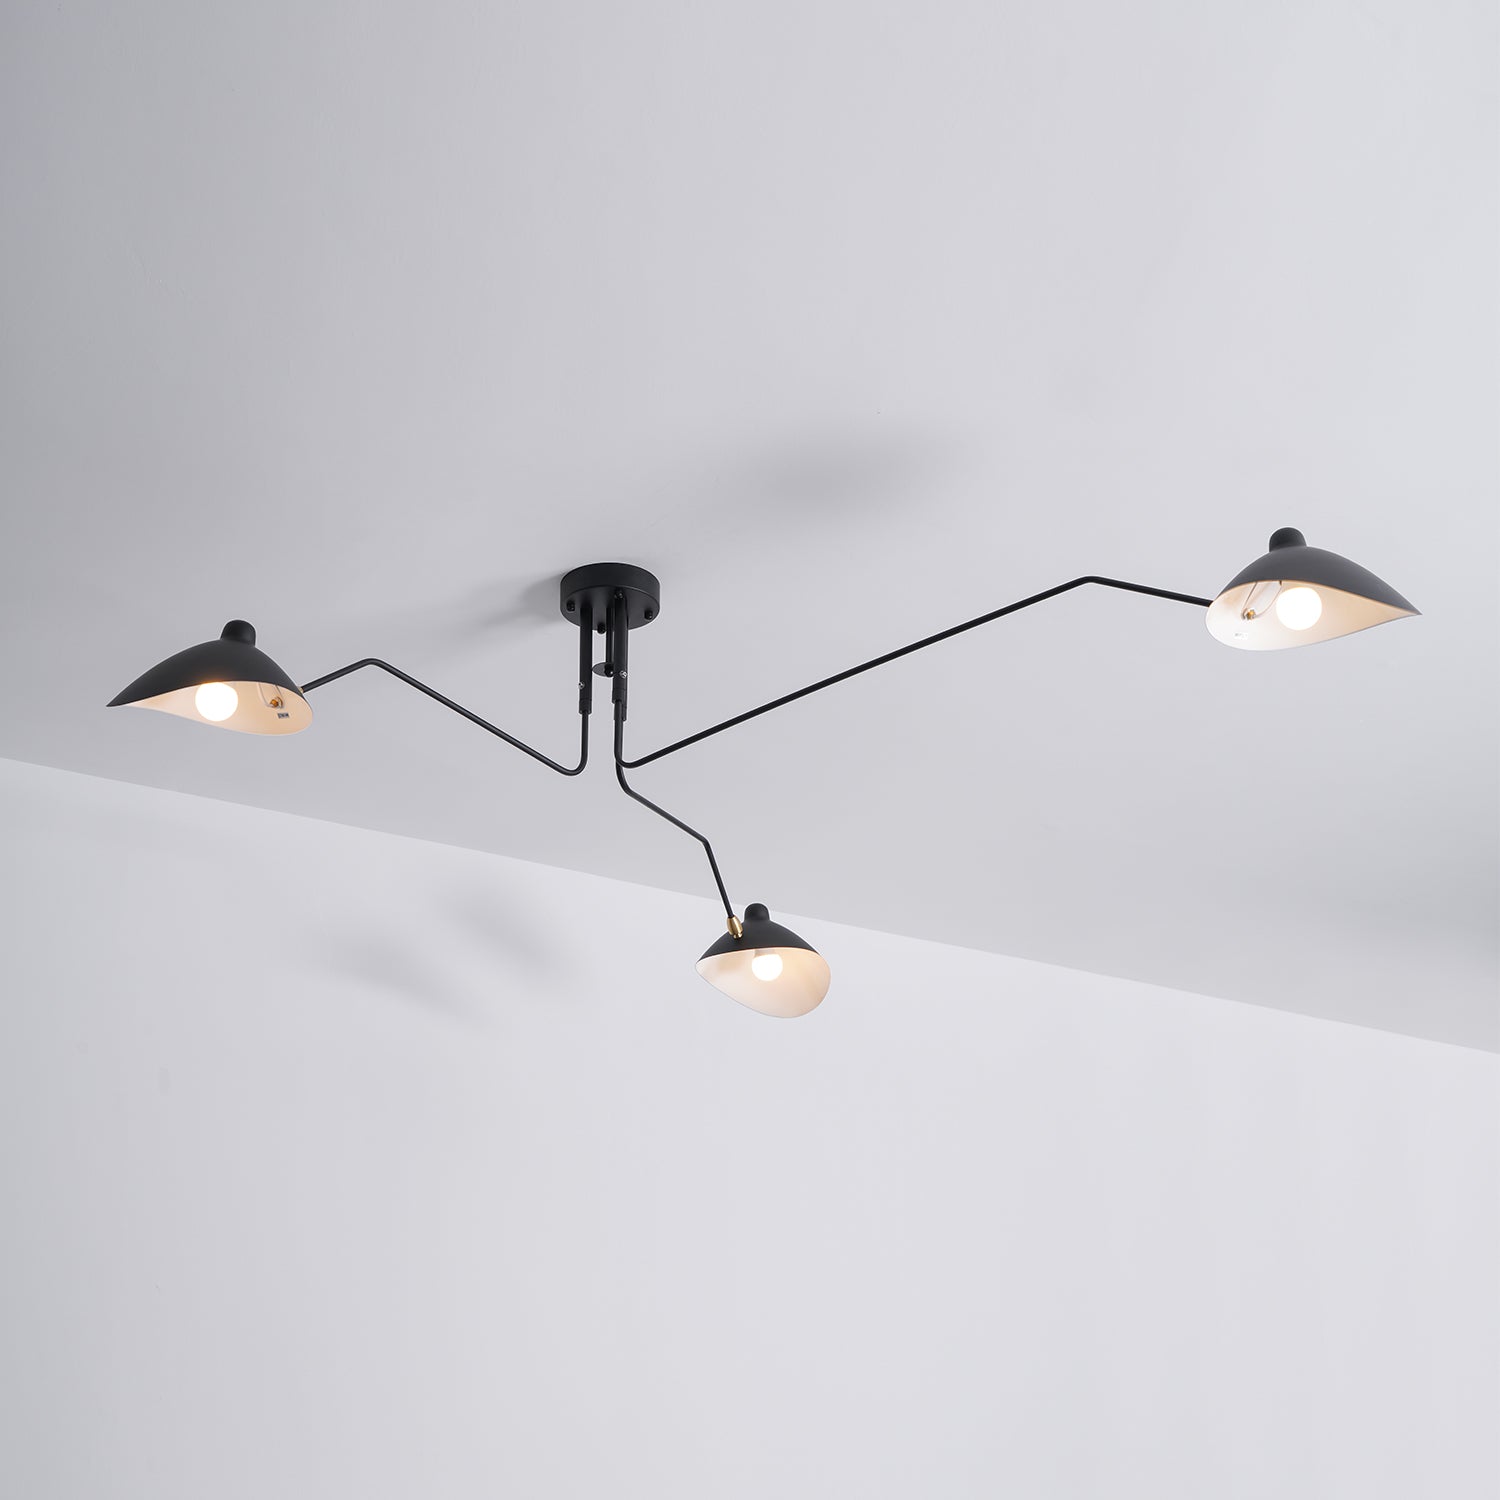 Horizontal Serge Mouille Ceiling Lamp A